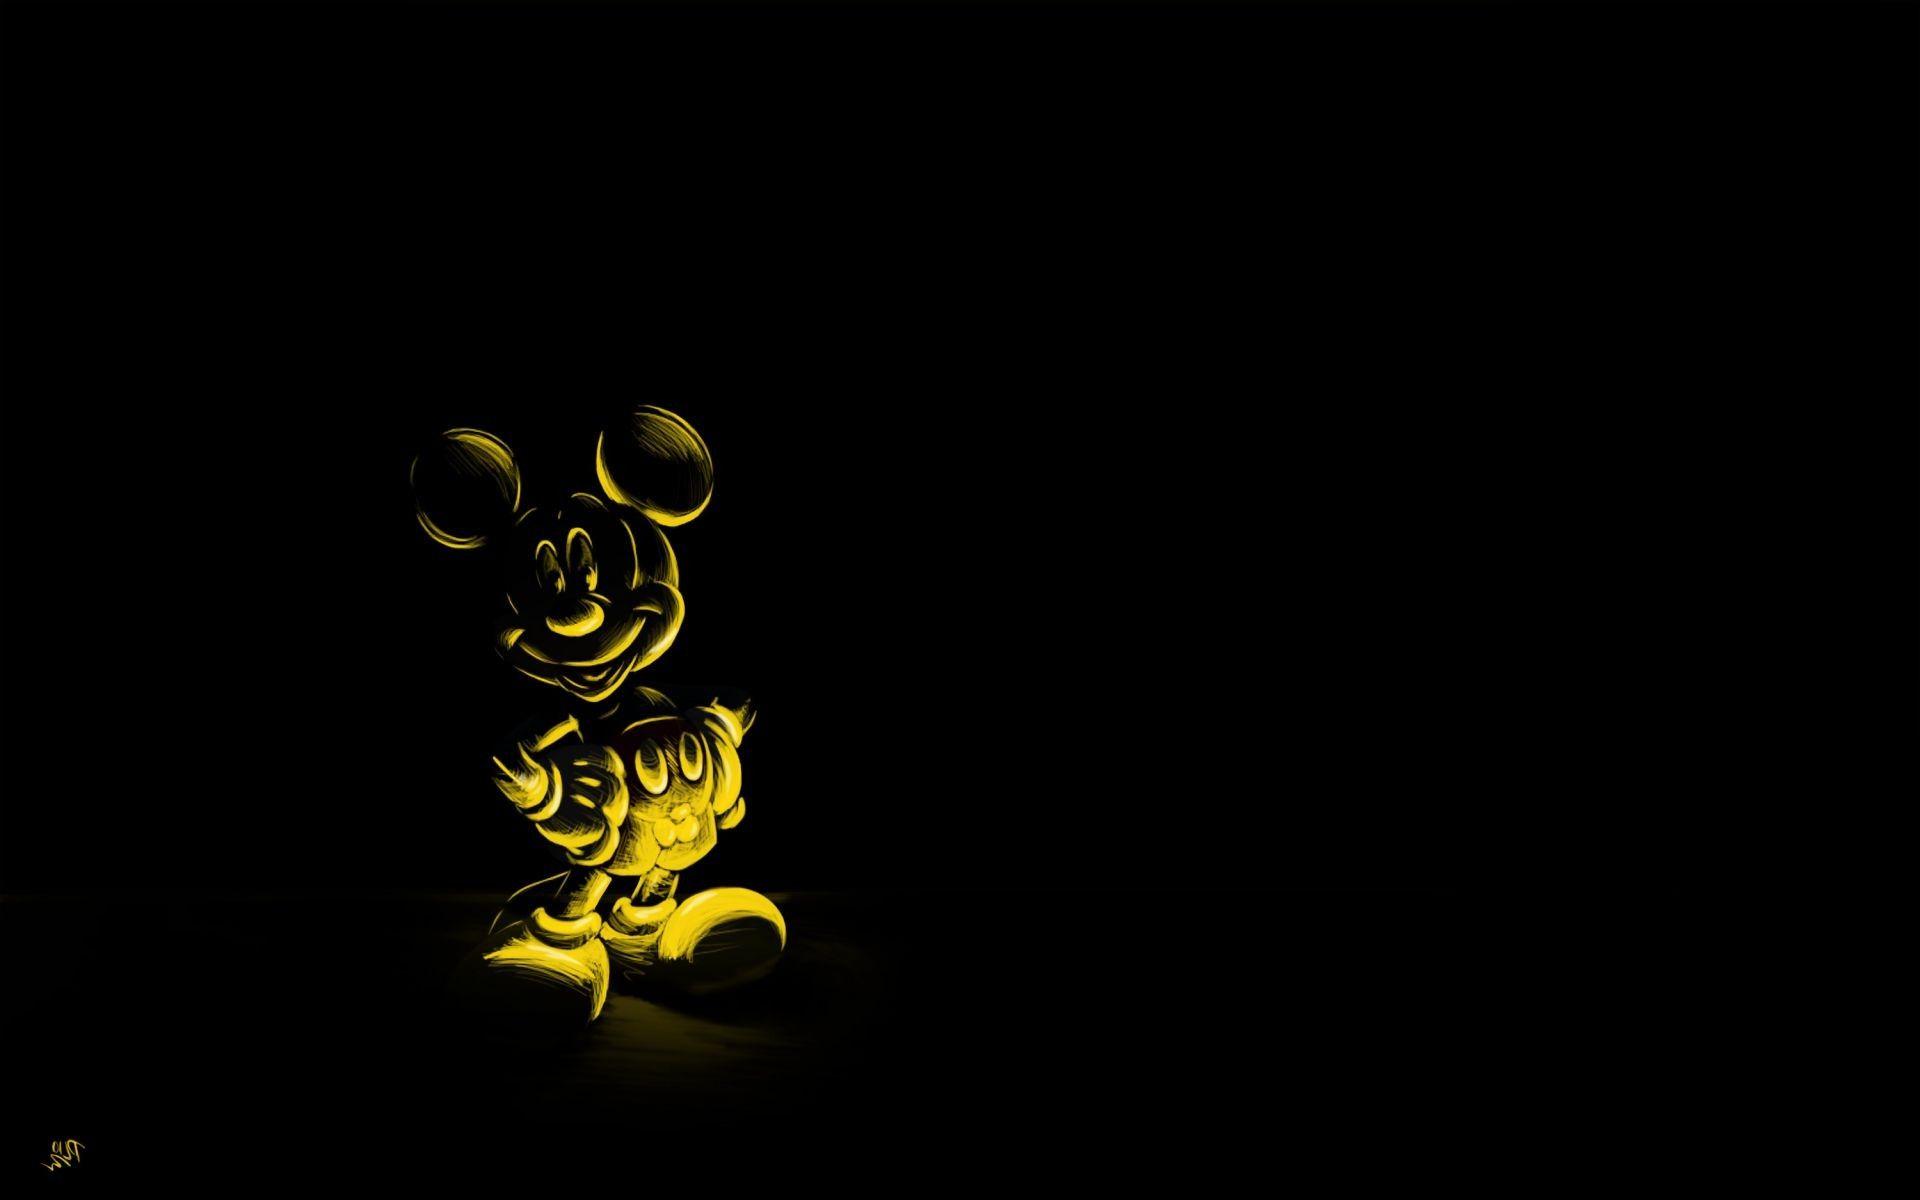 Mouse Black background character Mickey mouse cartoon. Android